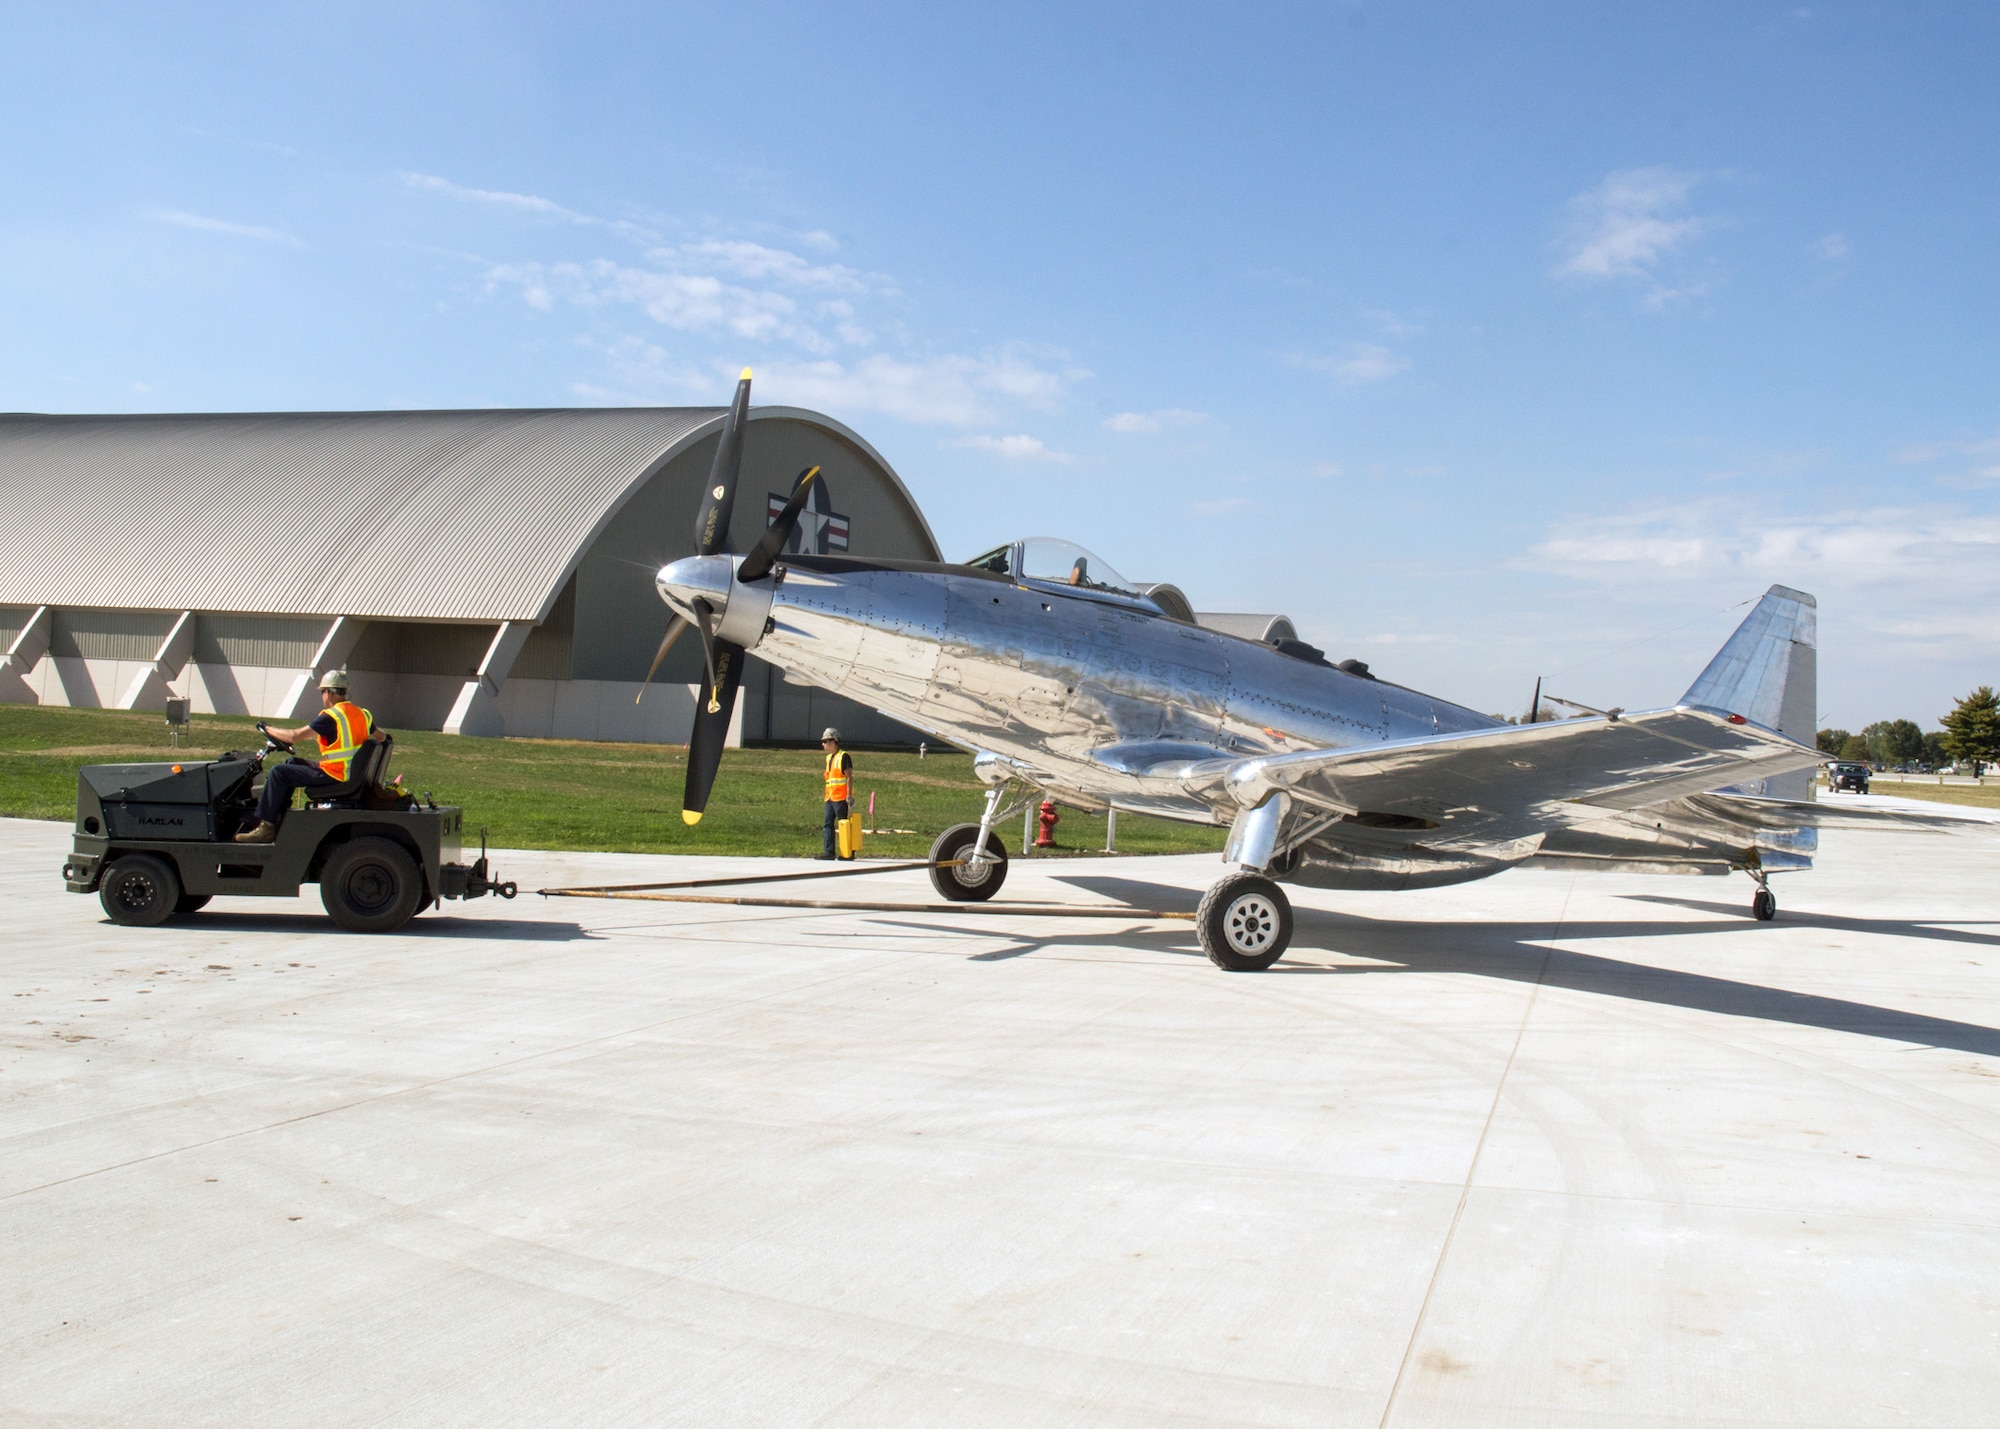 Restoration staff move the Fisher P-75A into the new fourth building at the National Museum of the U.S. Air Force on Oct. 7, 2015. (U.S. Air Force photo by Ken LaRock)